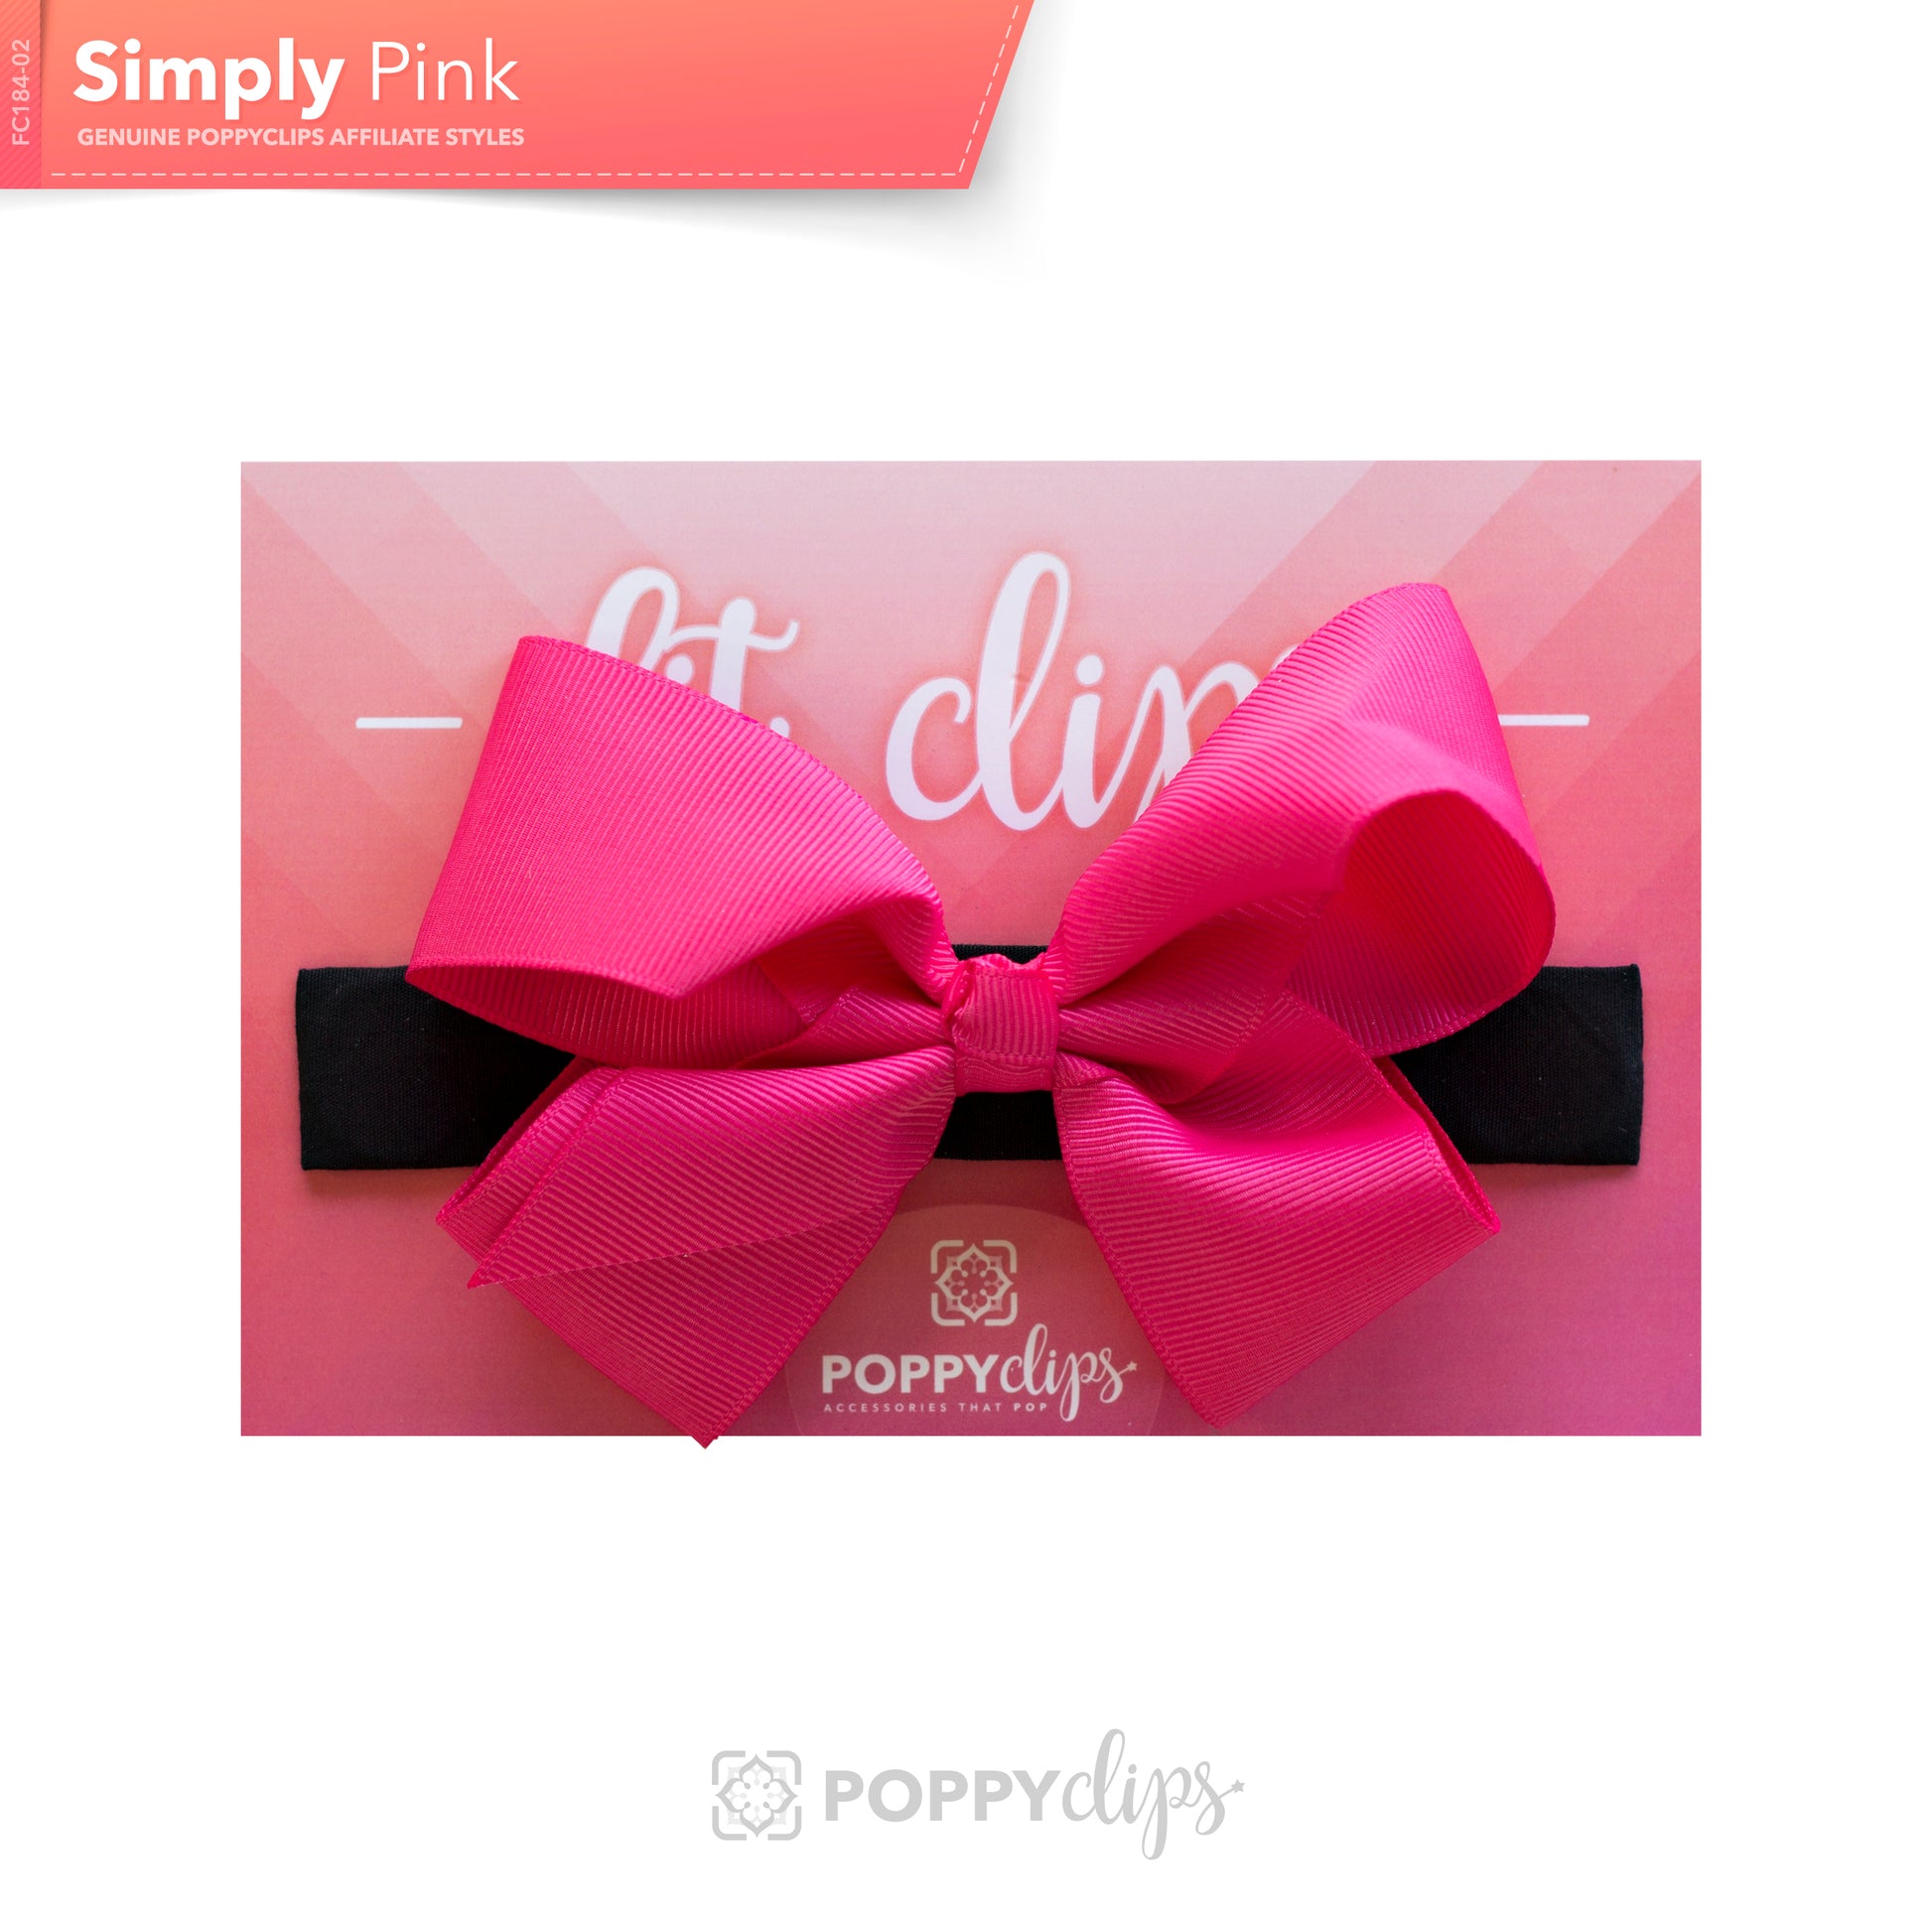 5 ¼” long by 7/8” wide black material with hidden magnets at each end.  Centered on the outside is a double hot pink bow that is approximately 4” across.